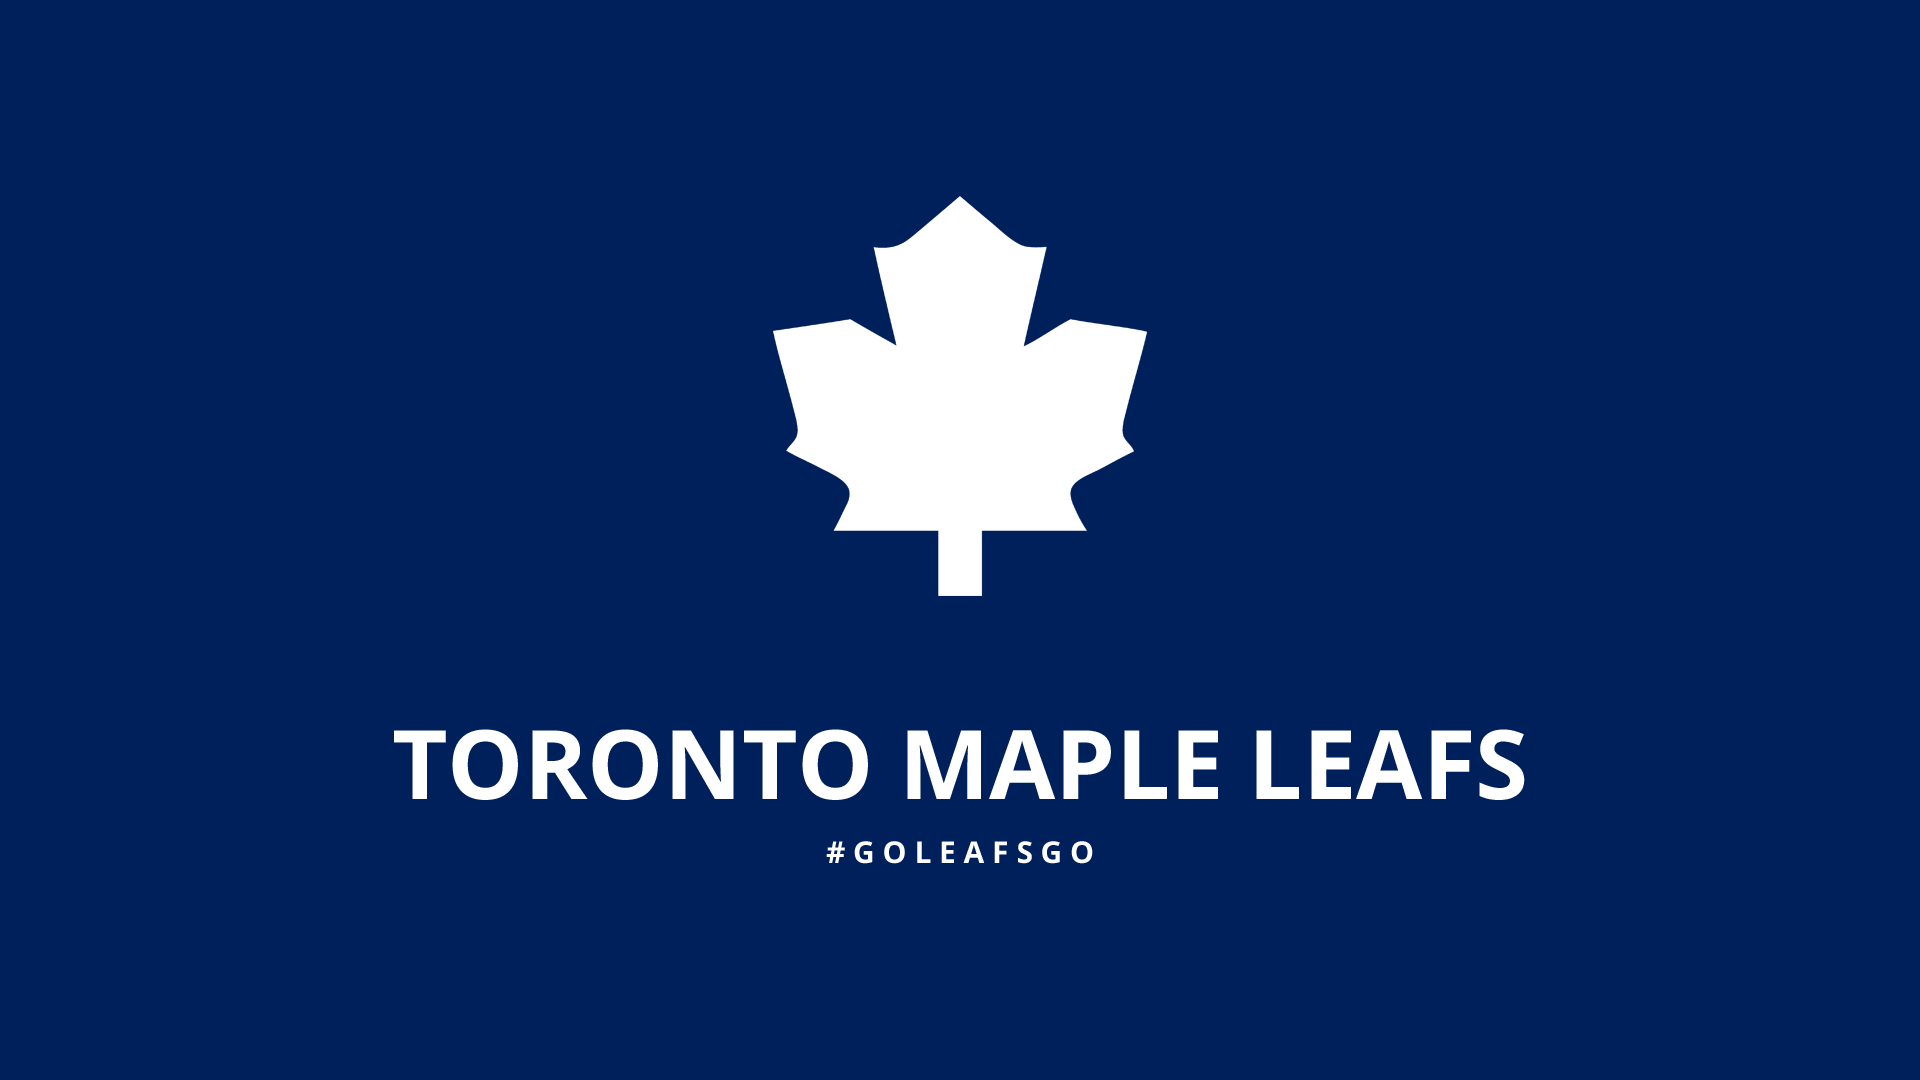 Toronto Maple Leafs Wallpapers 2015 - Wallpaper Cave